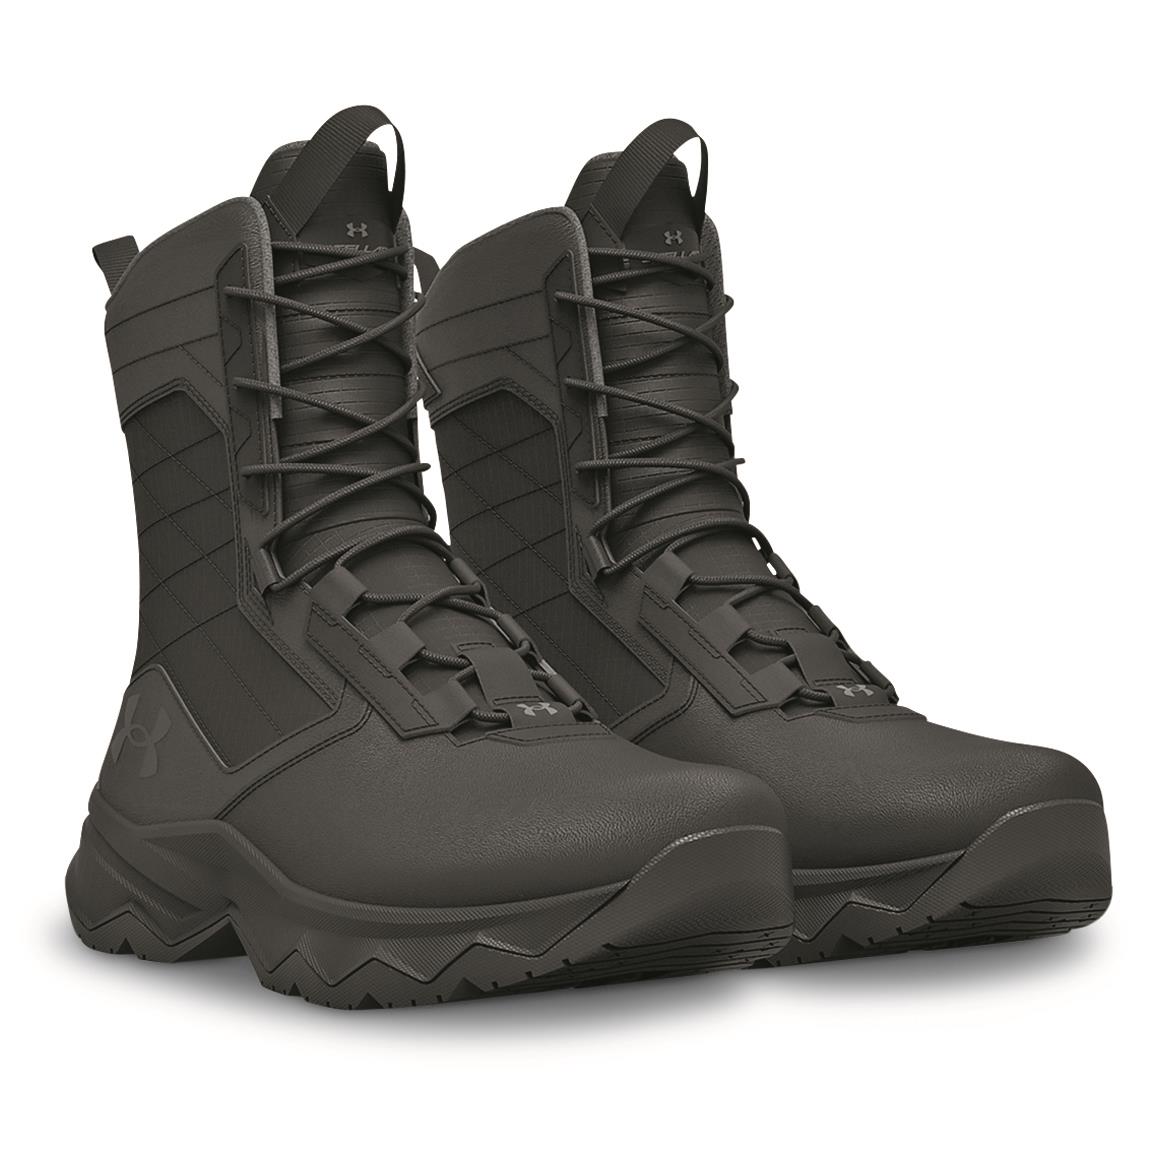 Under Armour Men's Stellar G2 Side-Zip Tactical Boots, Black/Black/Pitch Gray